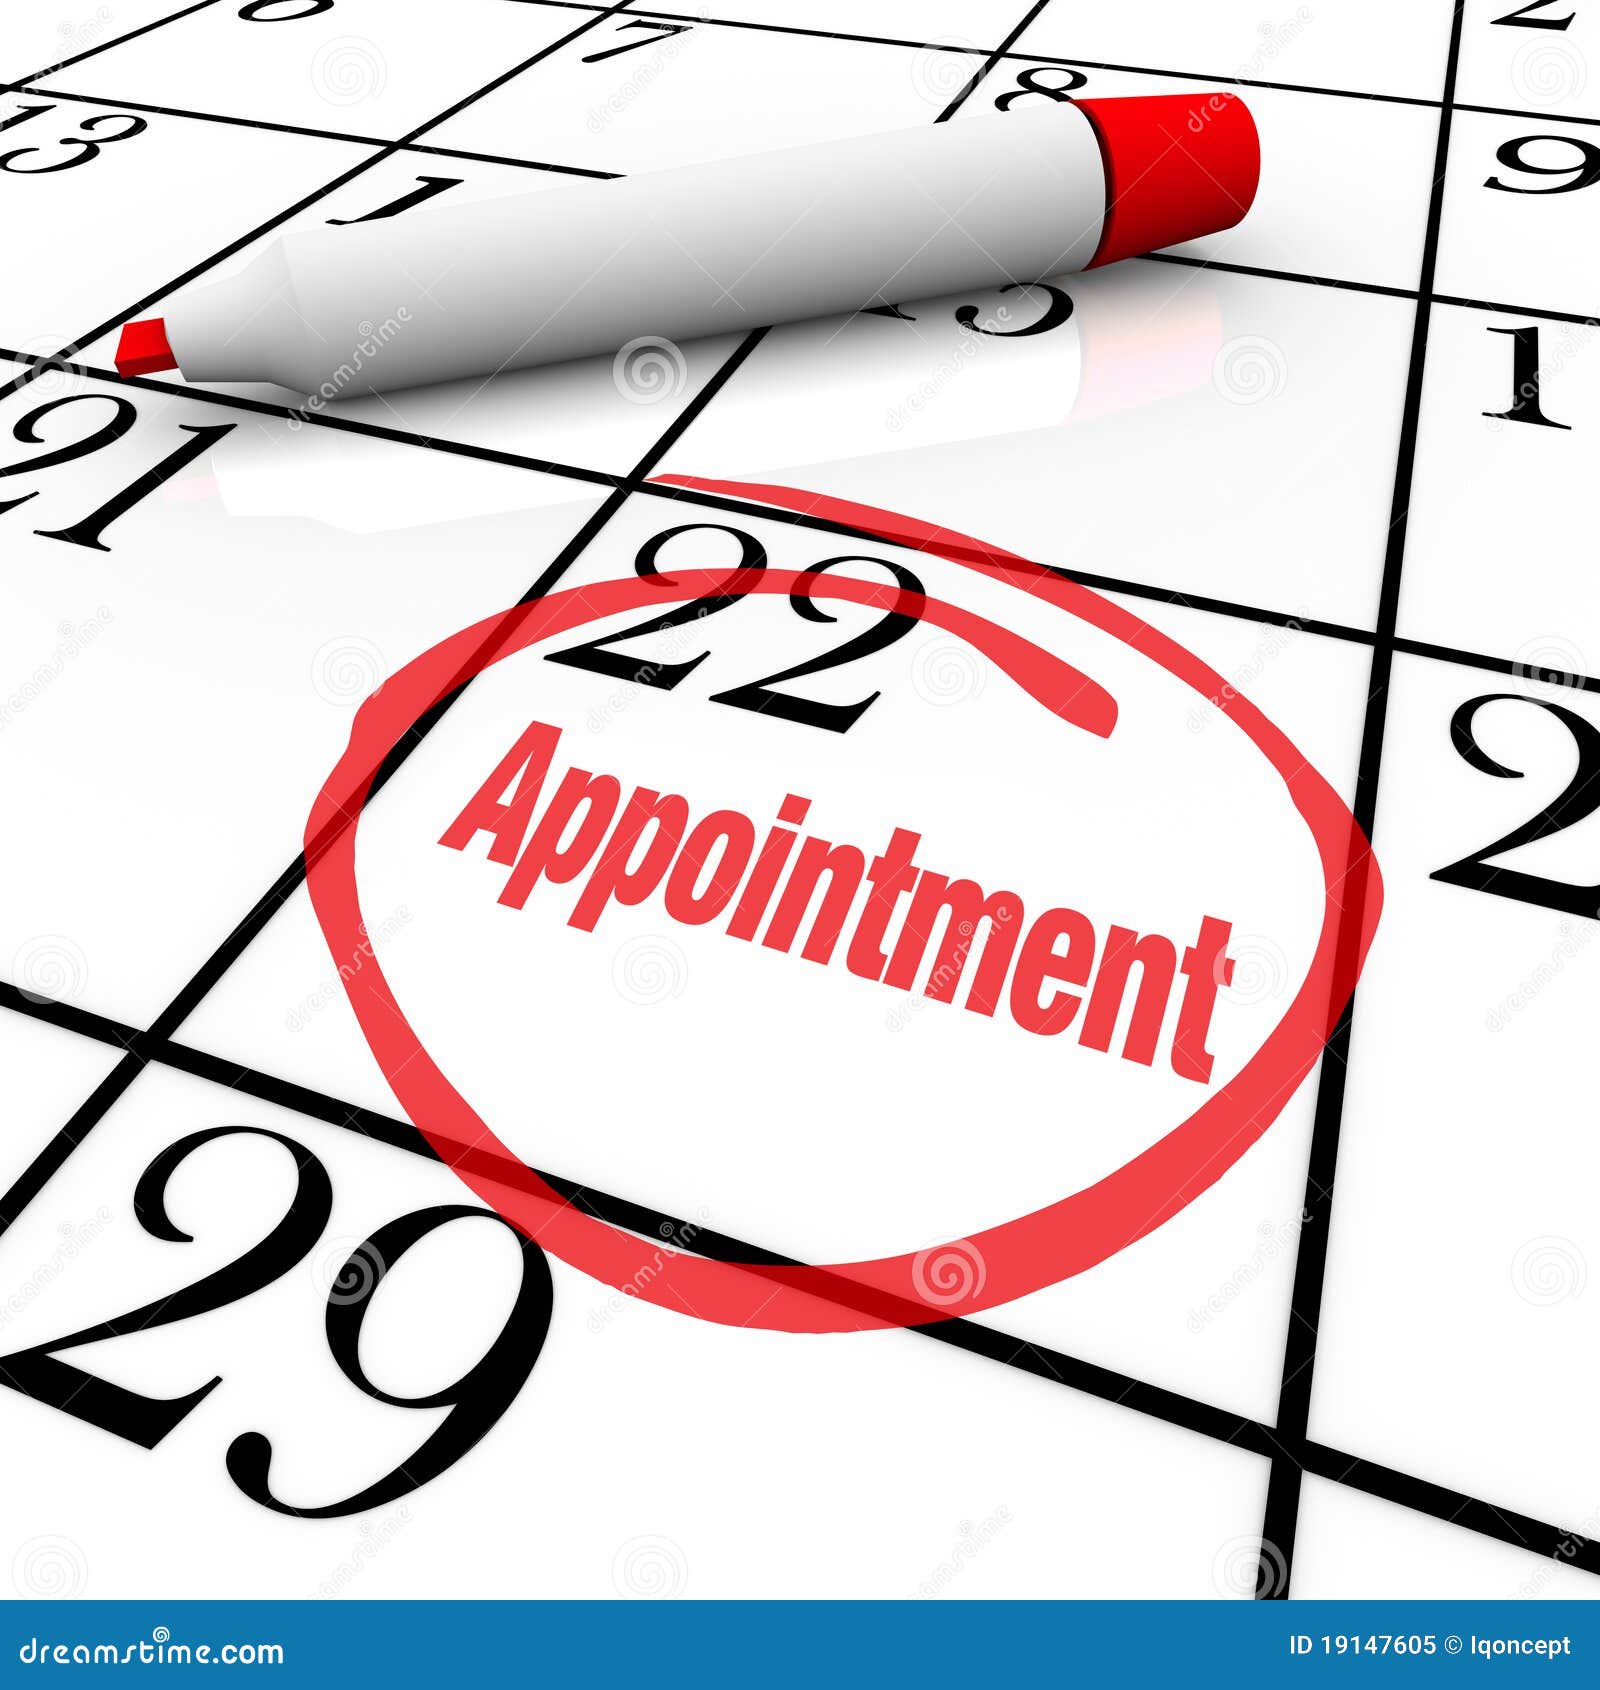 calendar - appointment day circled for reminder